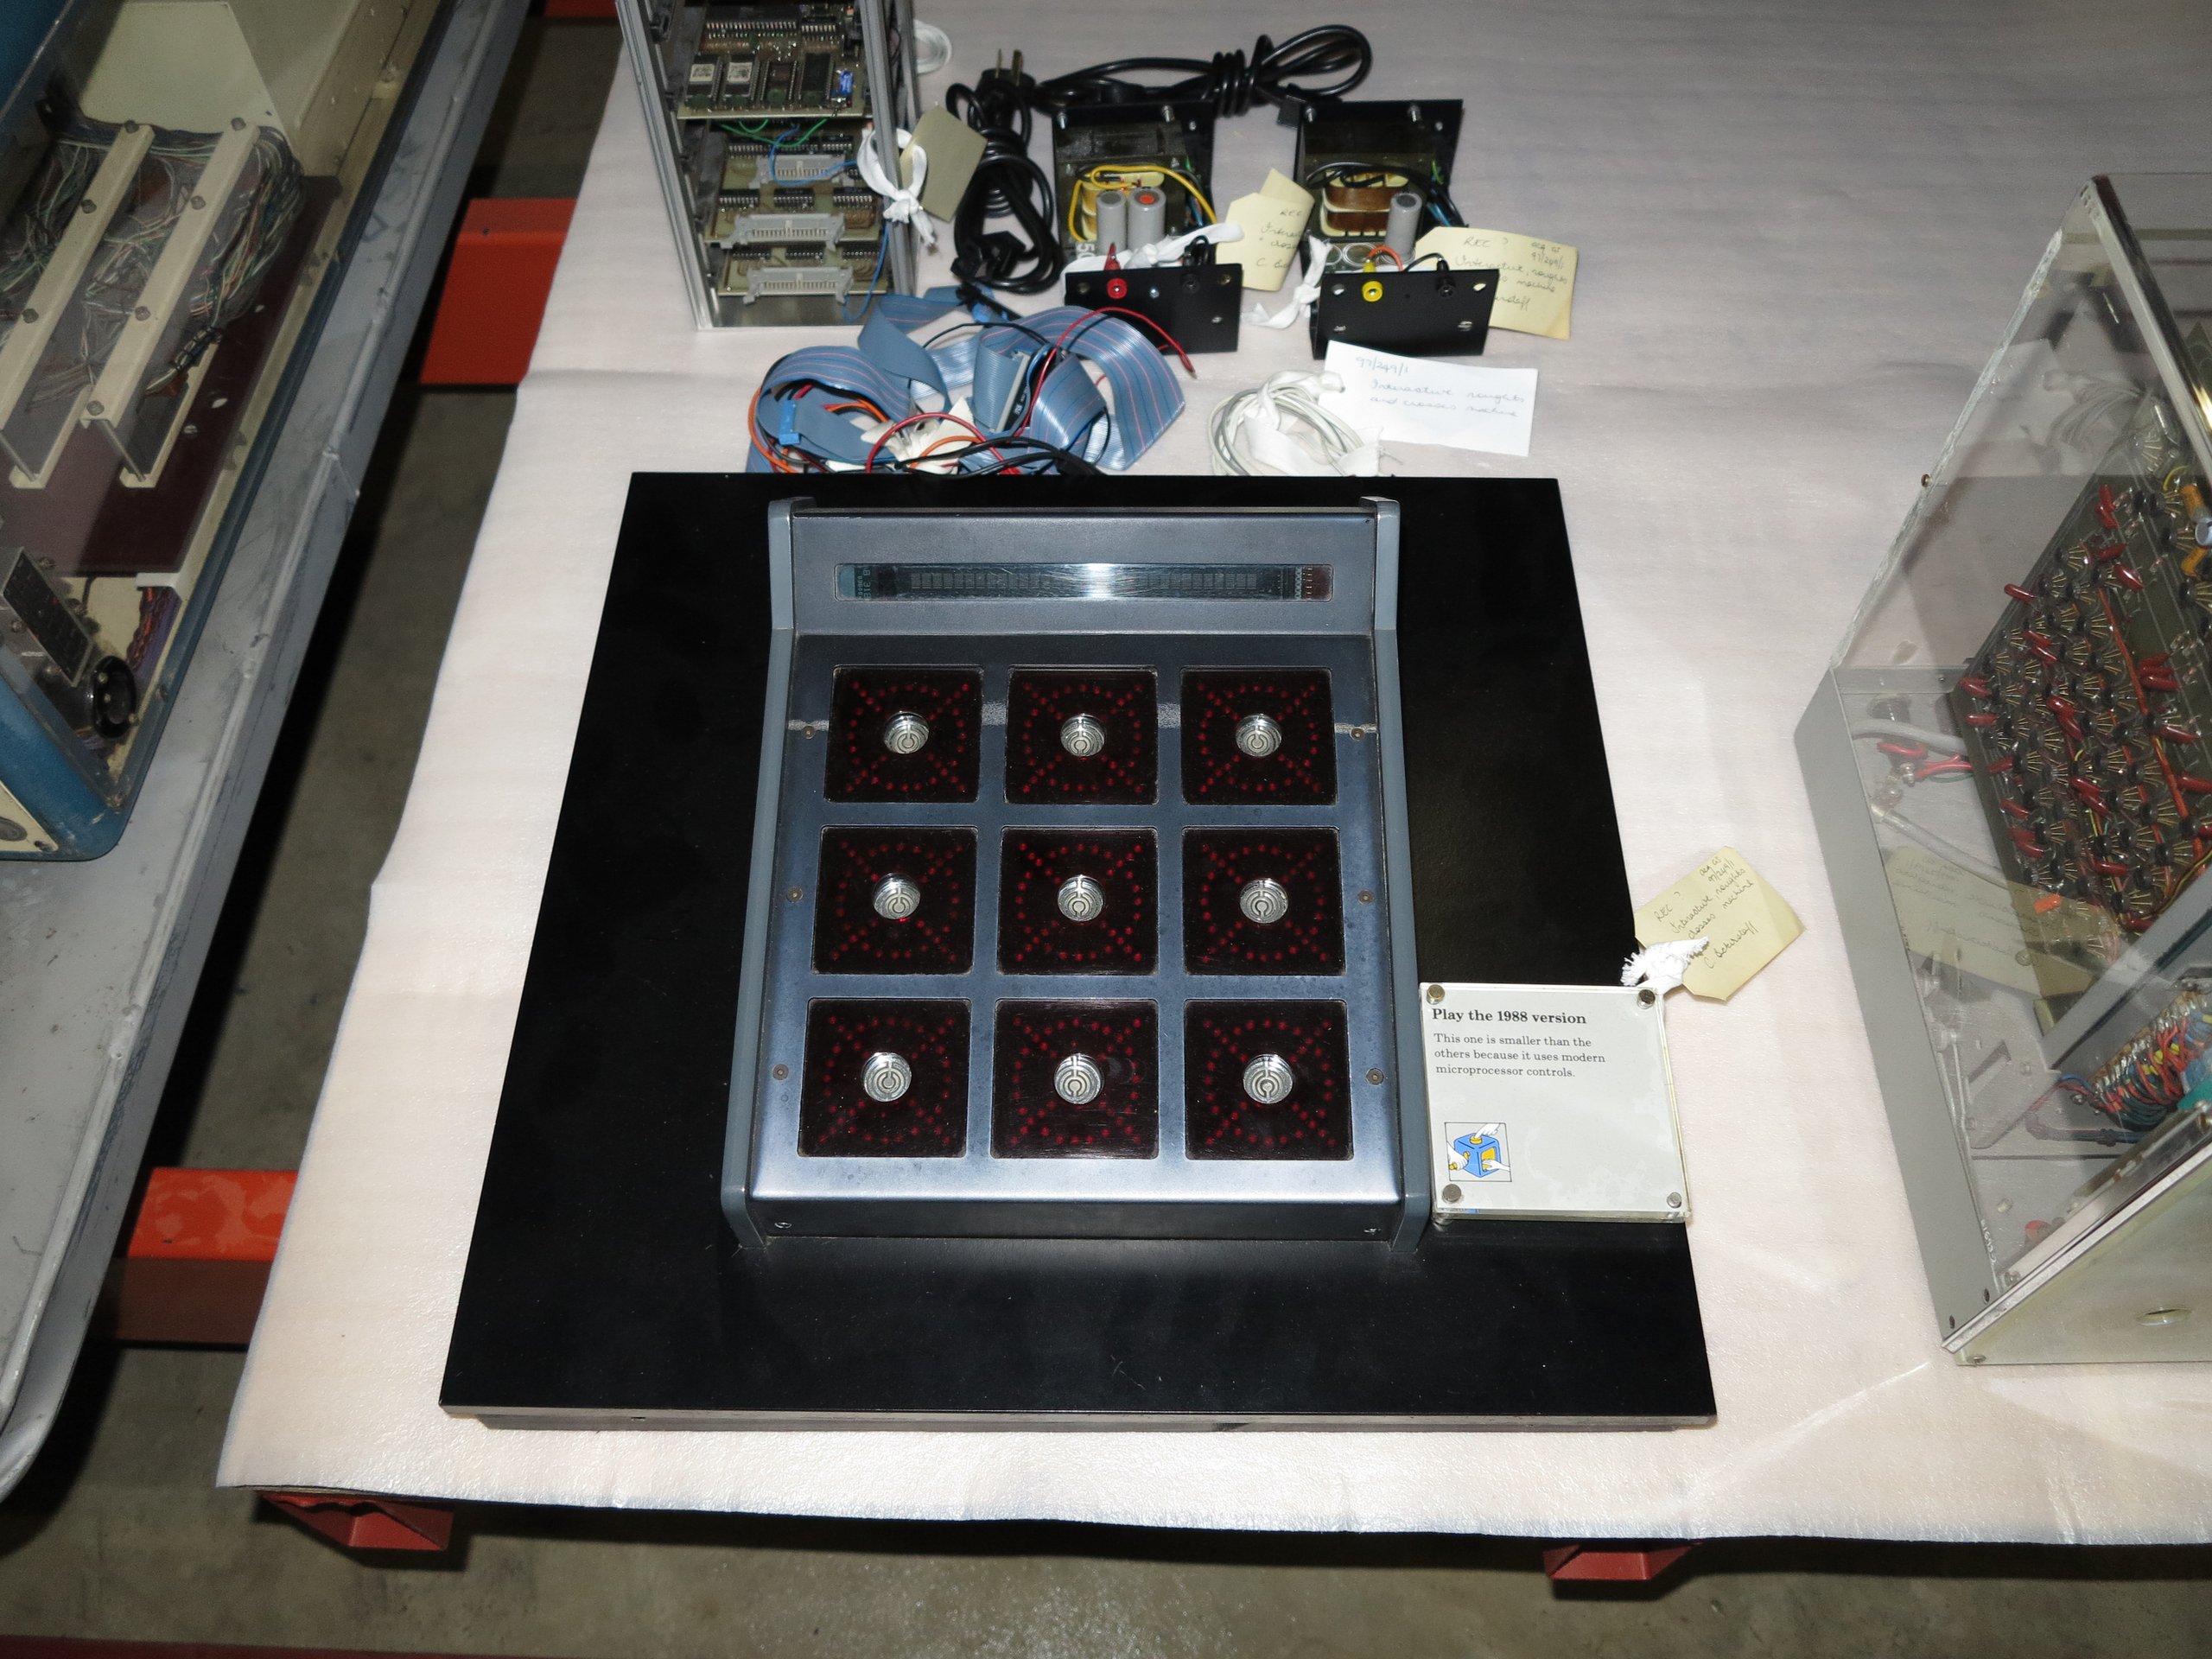 Microprocessor based interactive, noughts and crosses machine